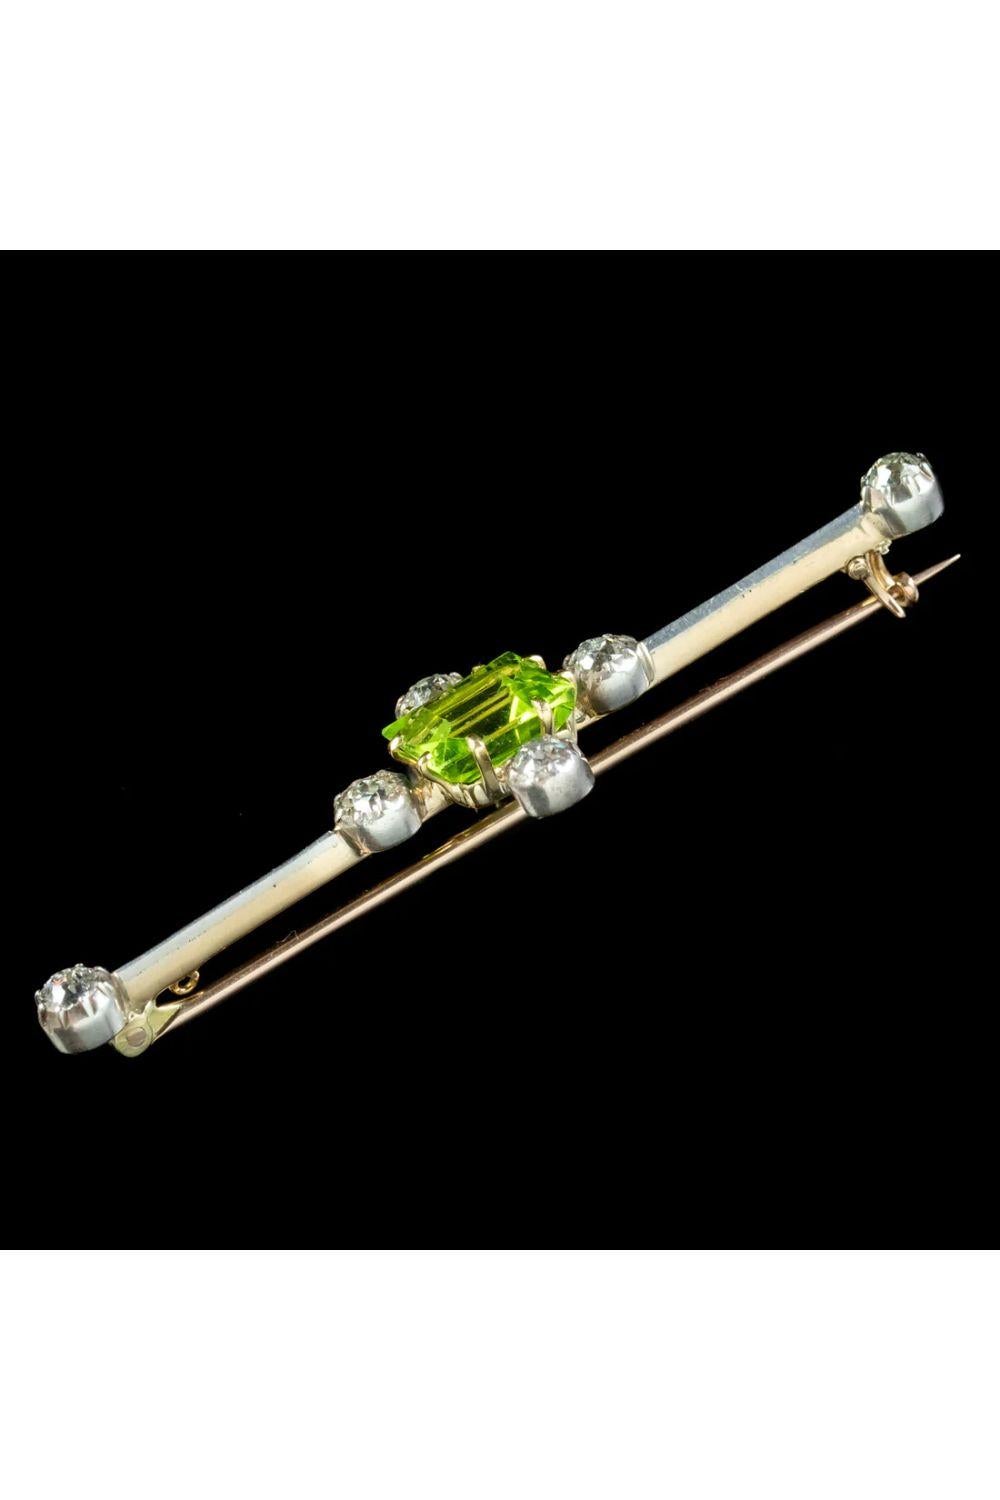 Edwardian Peridot Diamond Bar Brooch in 18 Carat Gold, circa 1901- 1915 In Good Condition For Sale In Kendal, GB